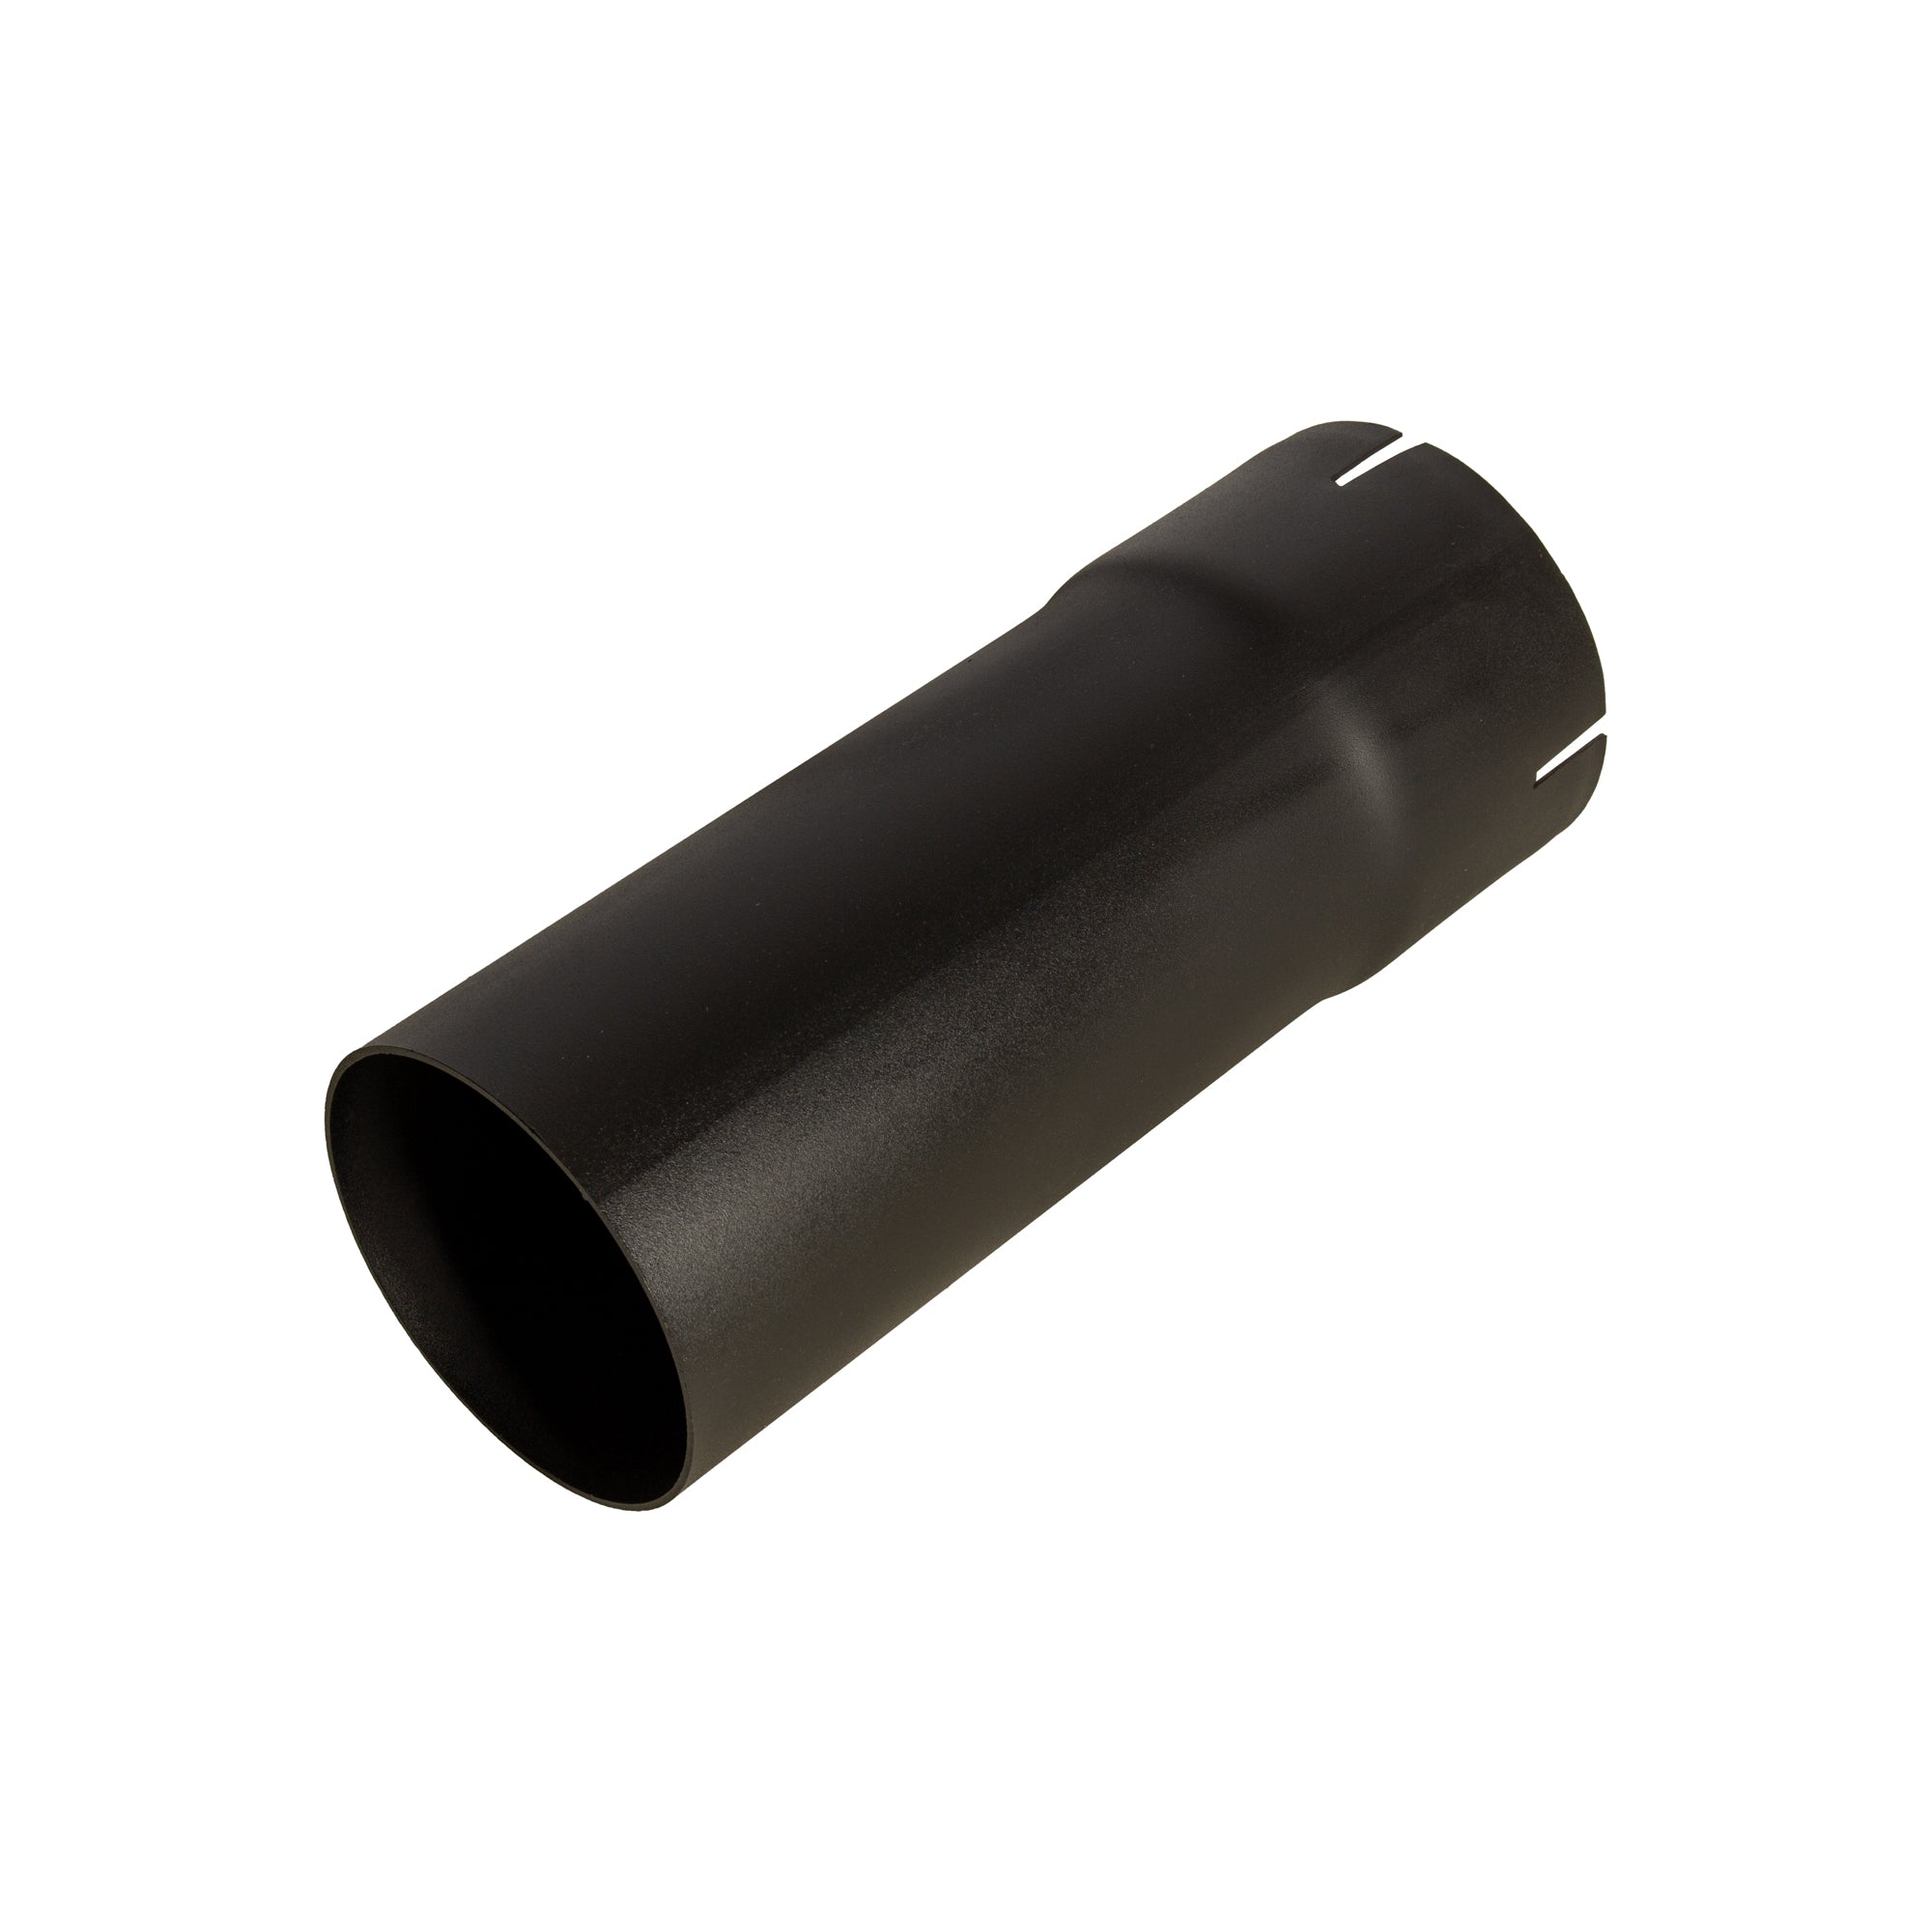 Exhaust Pipe Stack Replacement UNIVERSAL - 4-1/2" x 12", Straight Black